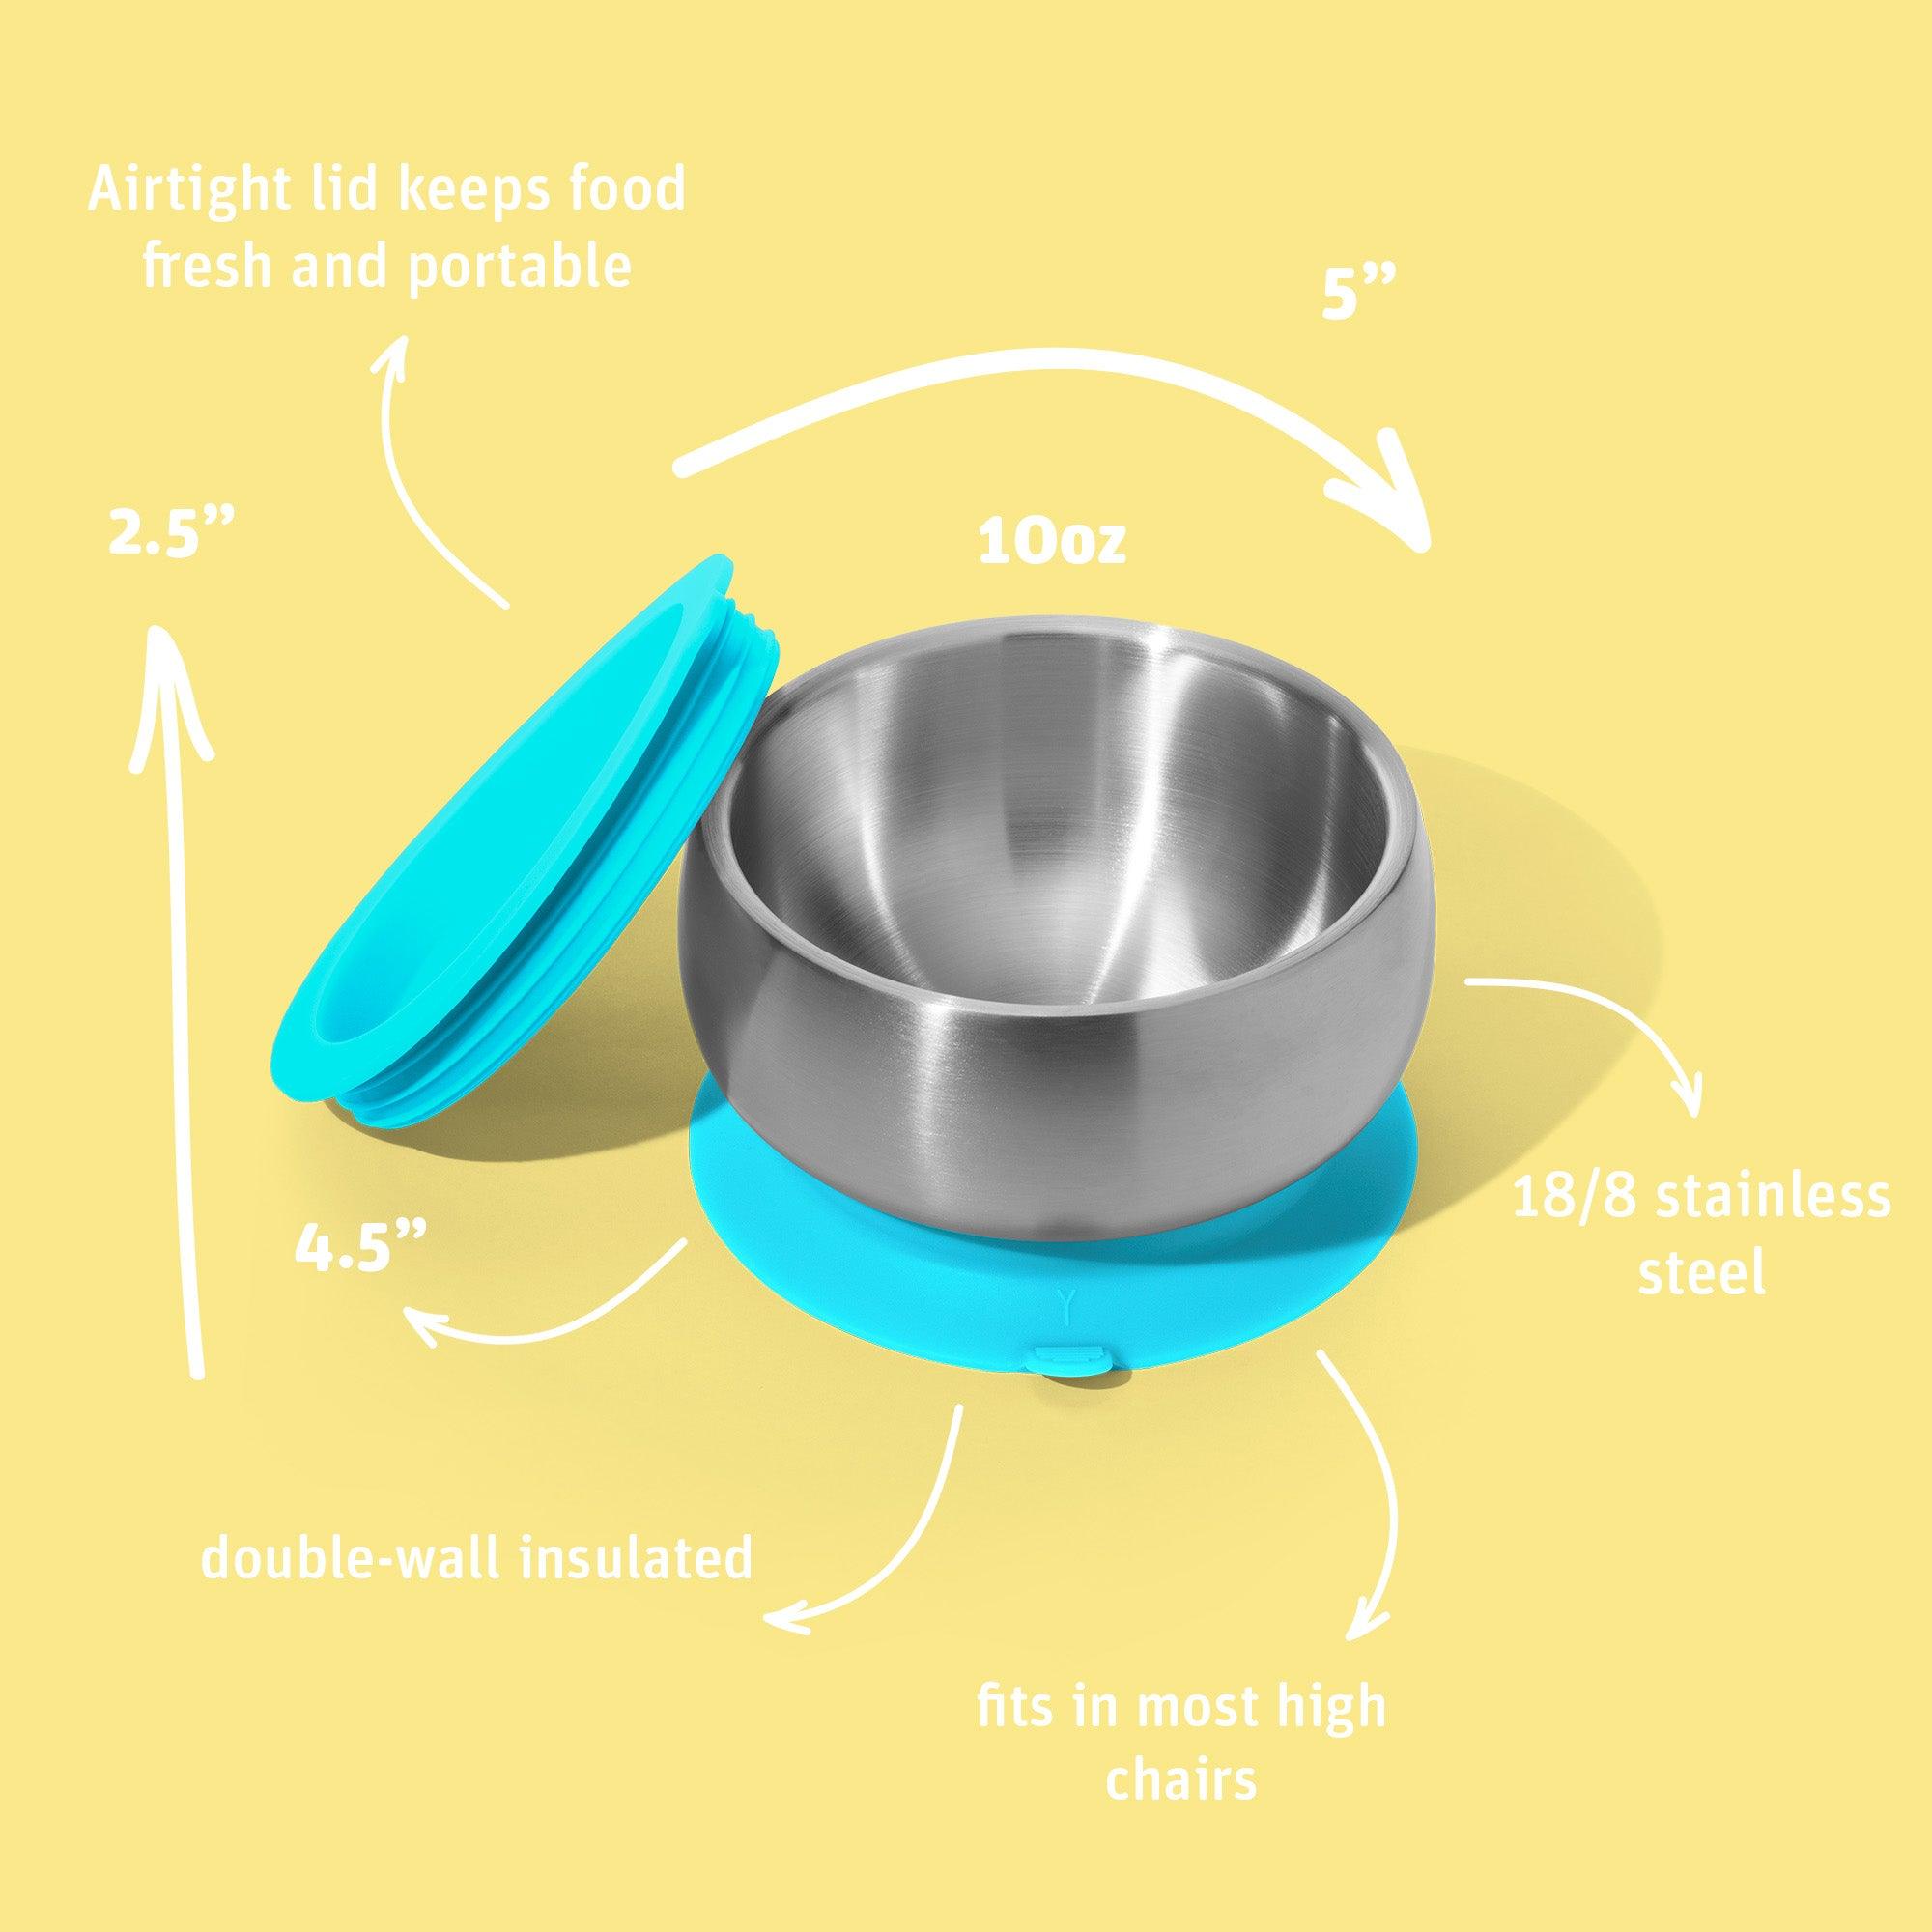 Stainless Steel Starter Kit - Avanchy Sustainable Baby Dishware